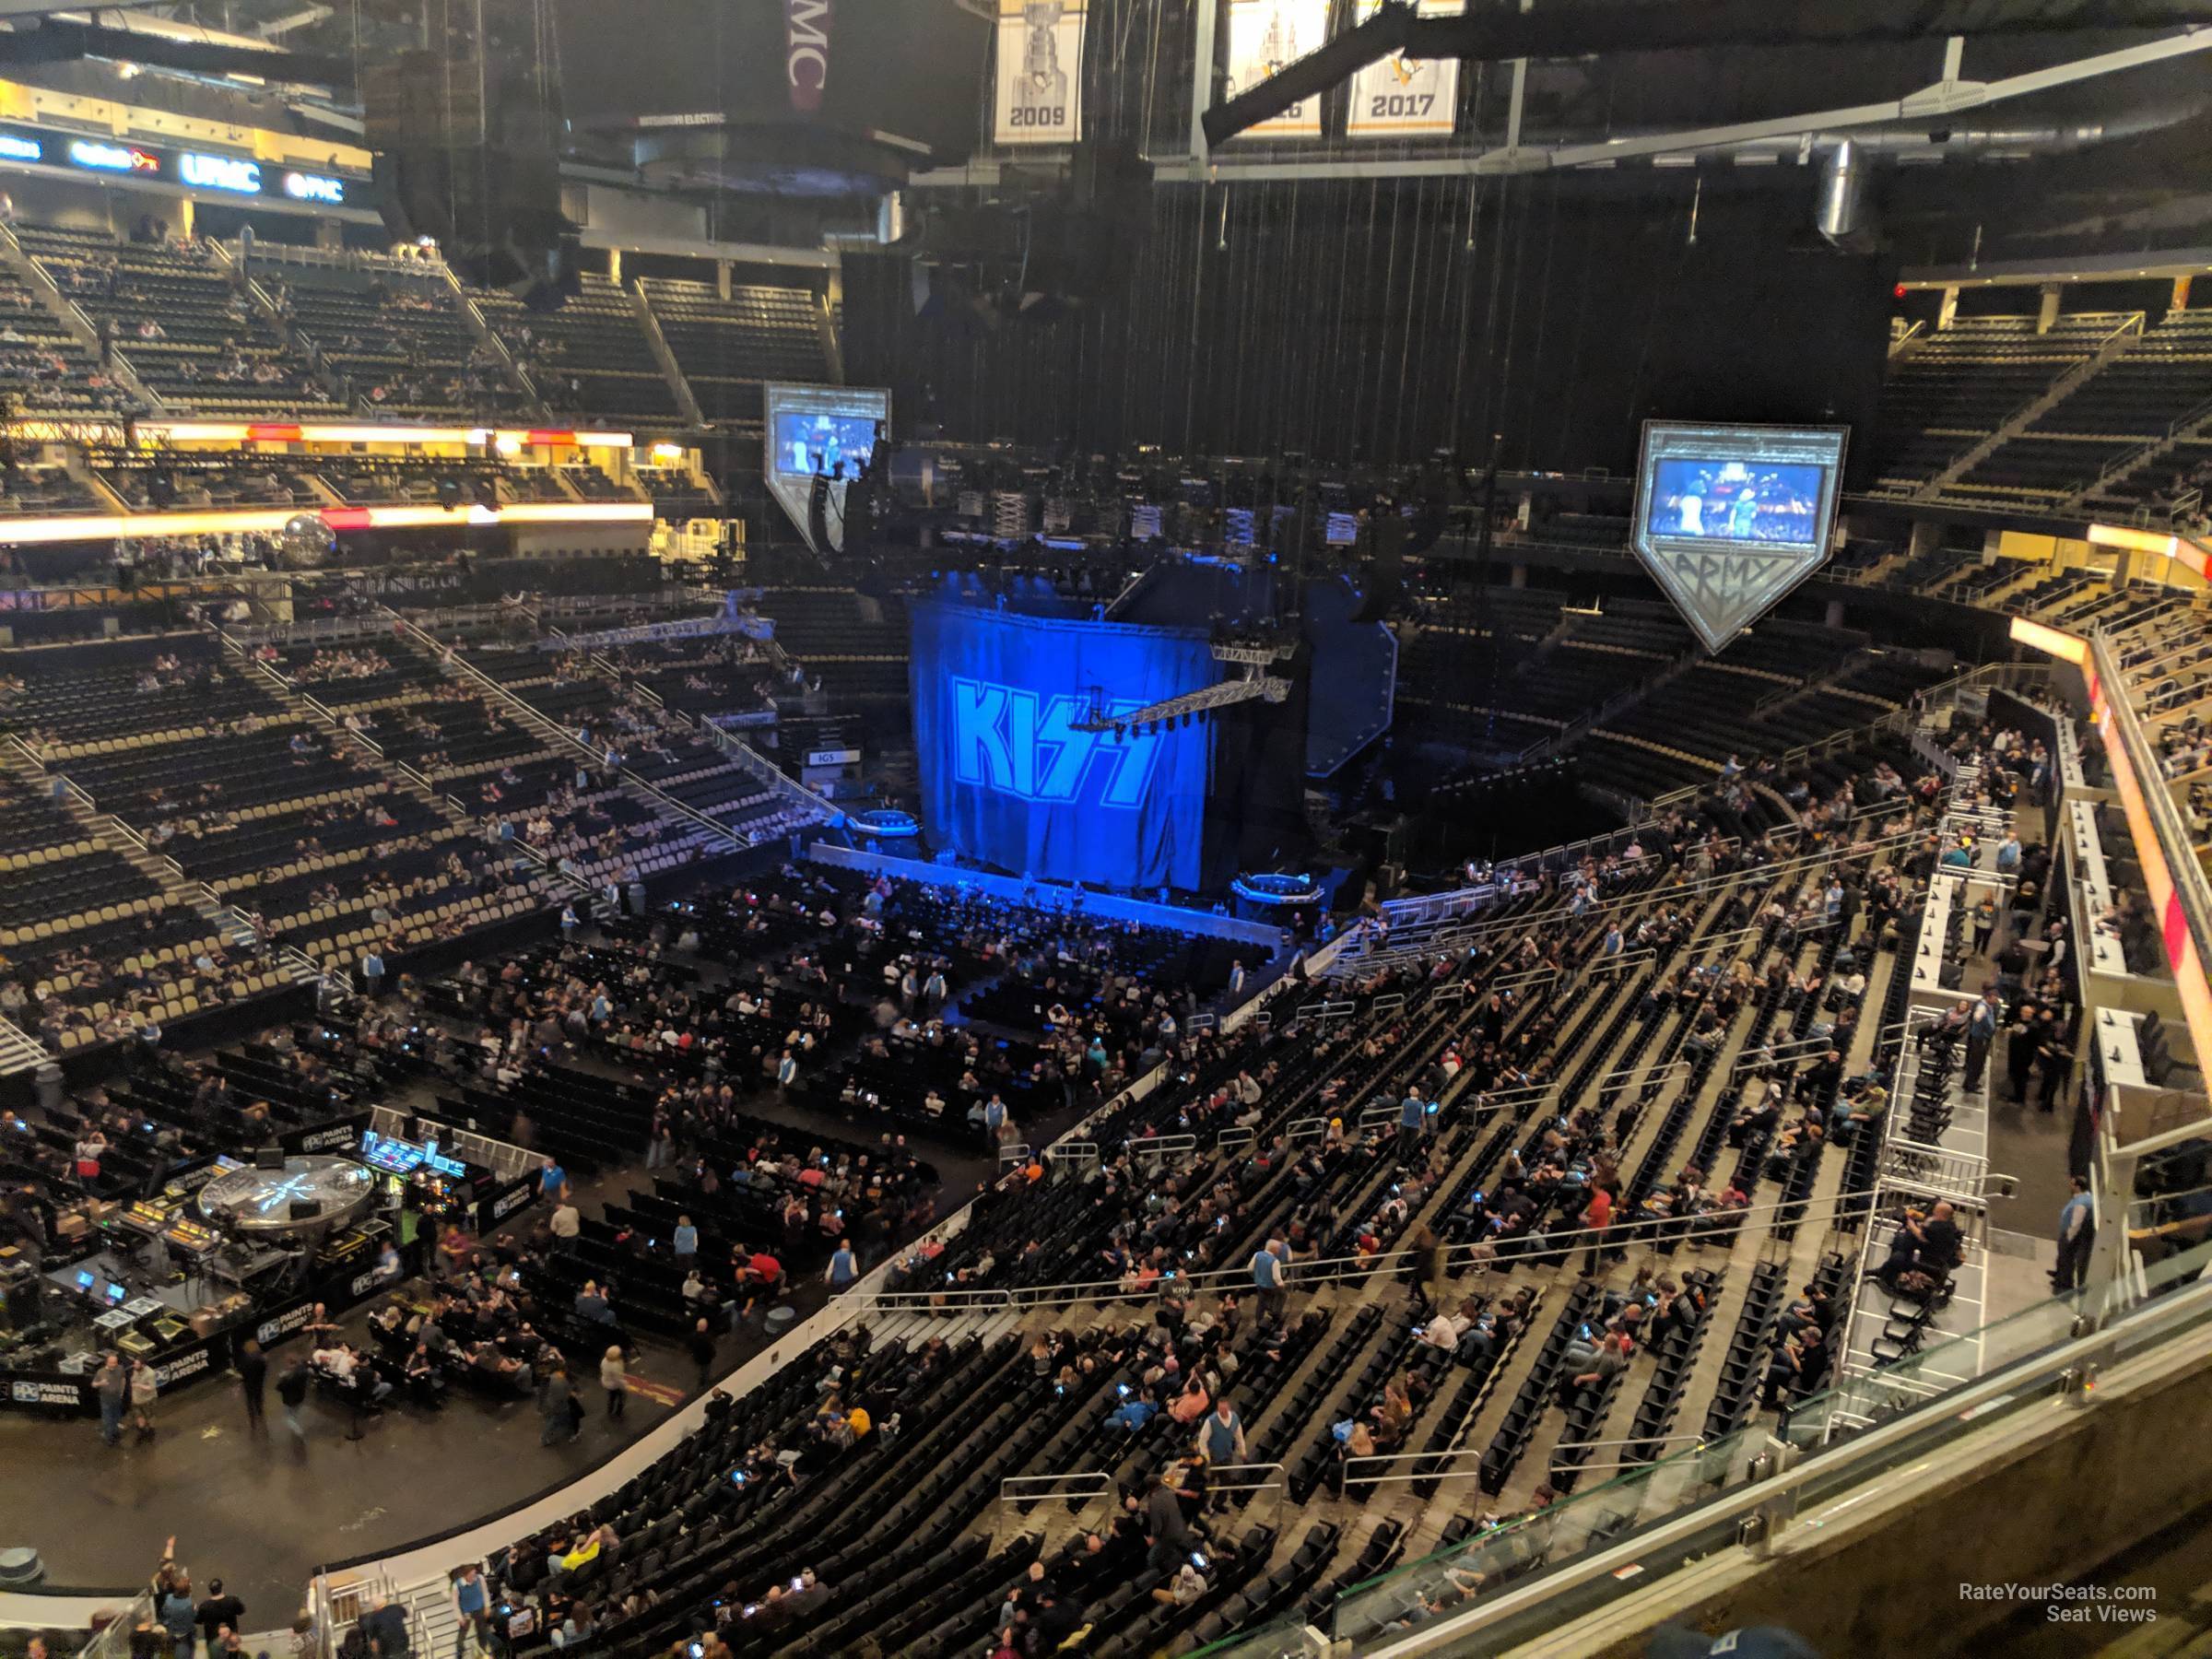 section 207, row c seat view  for concert - ppg paints arena